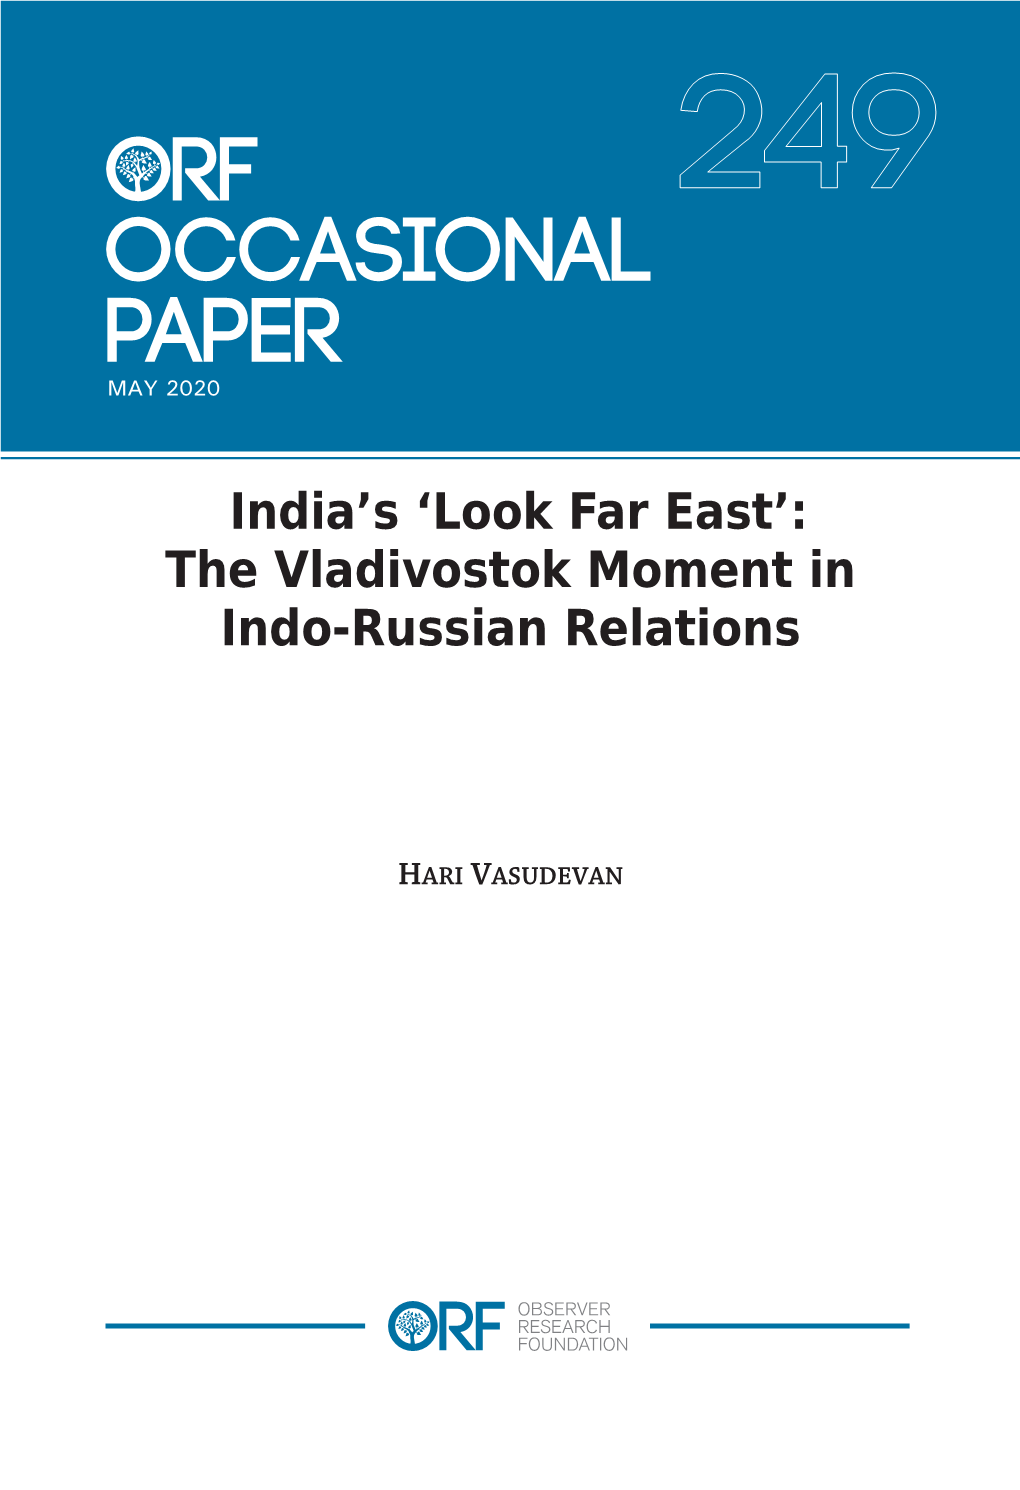 'Look Far East': the Vladivostok Moment in Indo-Russian Relations